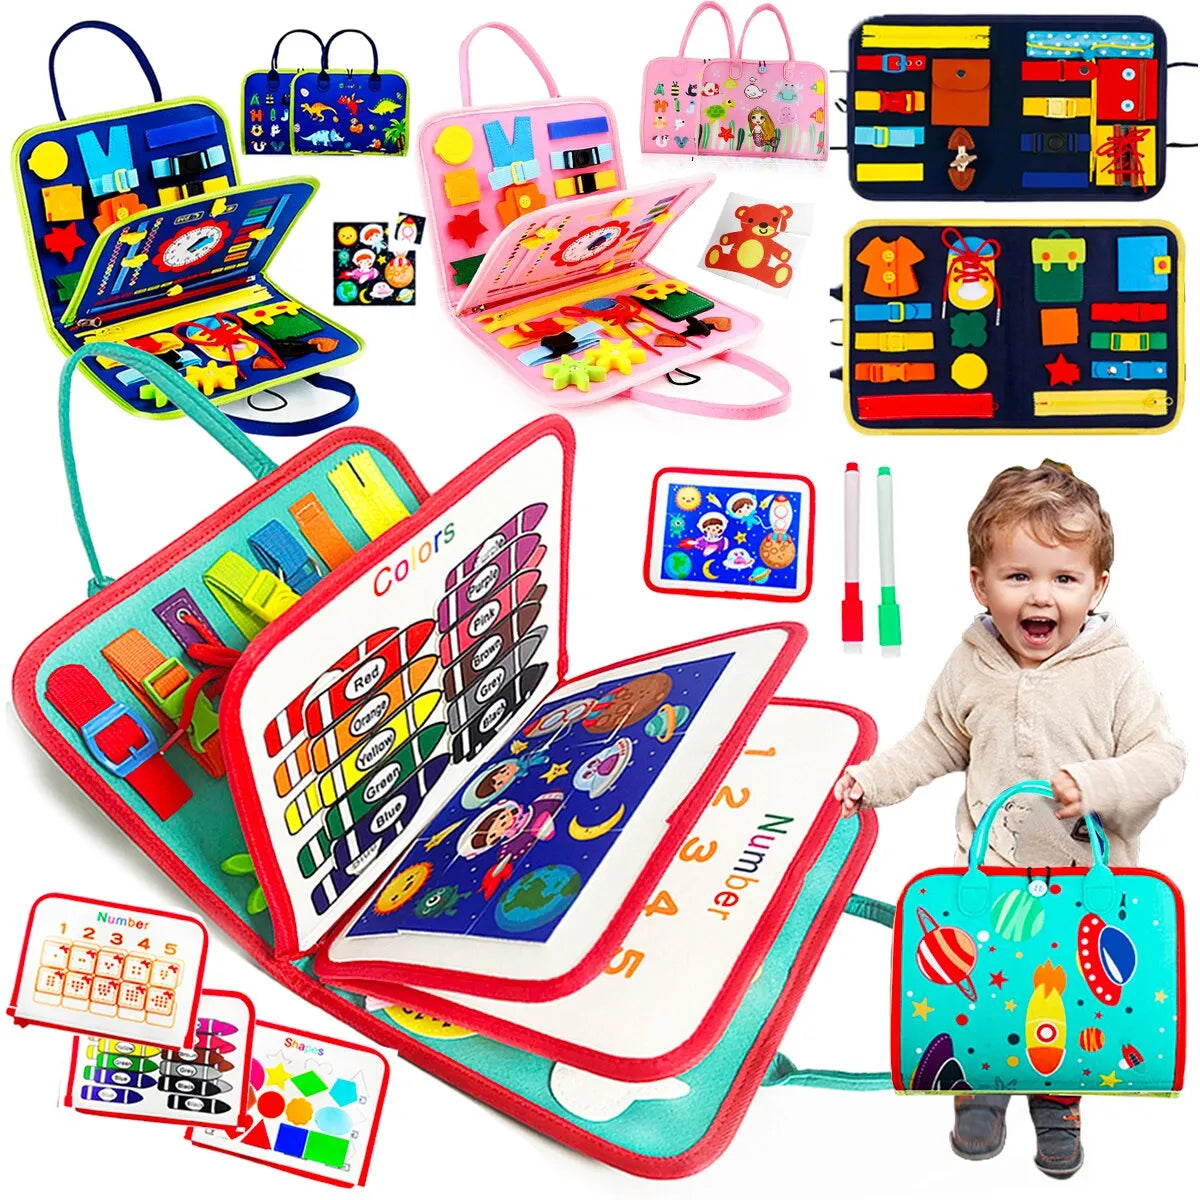 Preschool learning board for your toddler